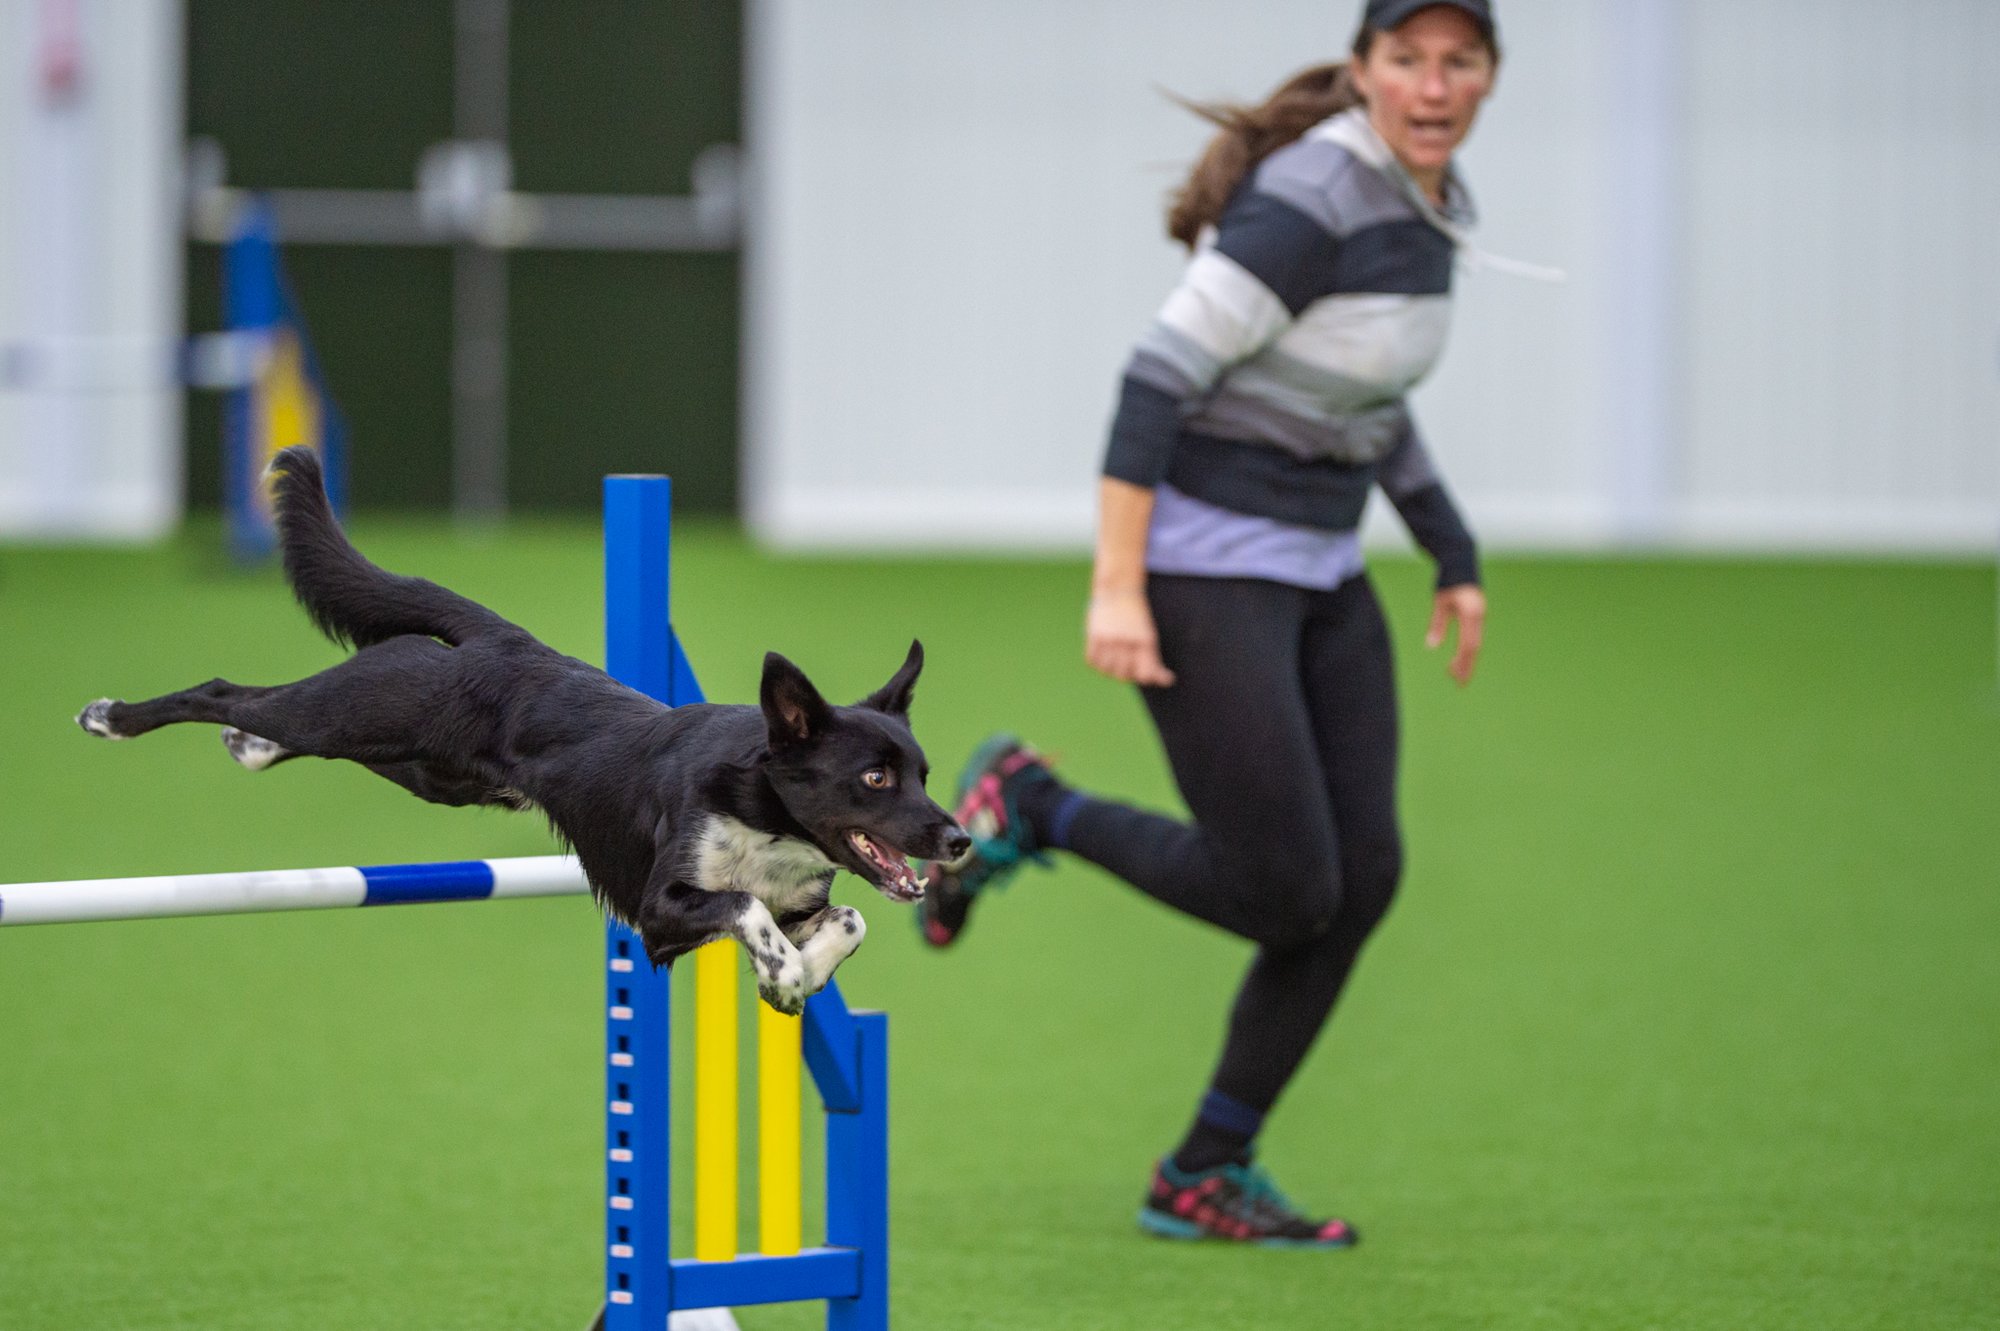 A Dog jumps over an obstacle with the help of Bonny Quick who is a Different Dog Ambassador